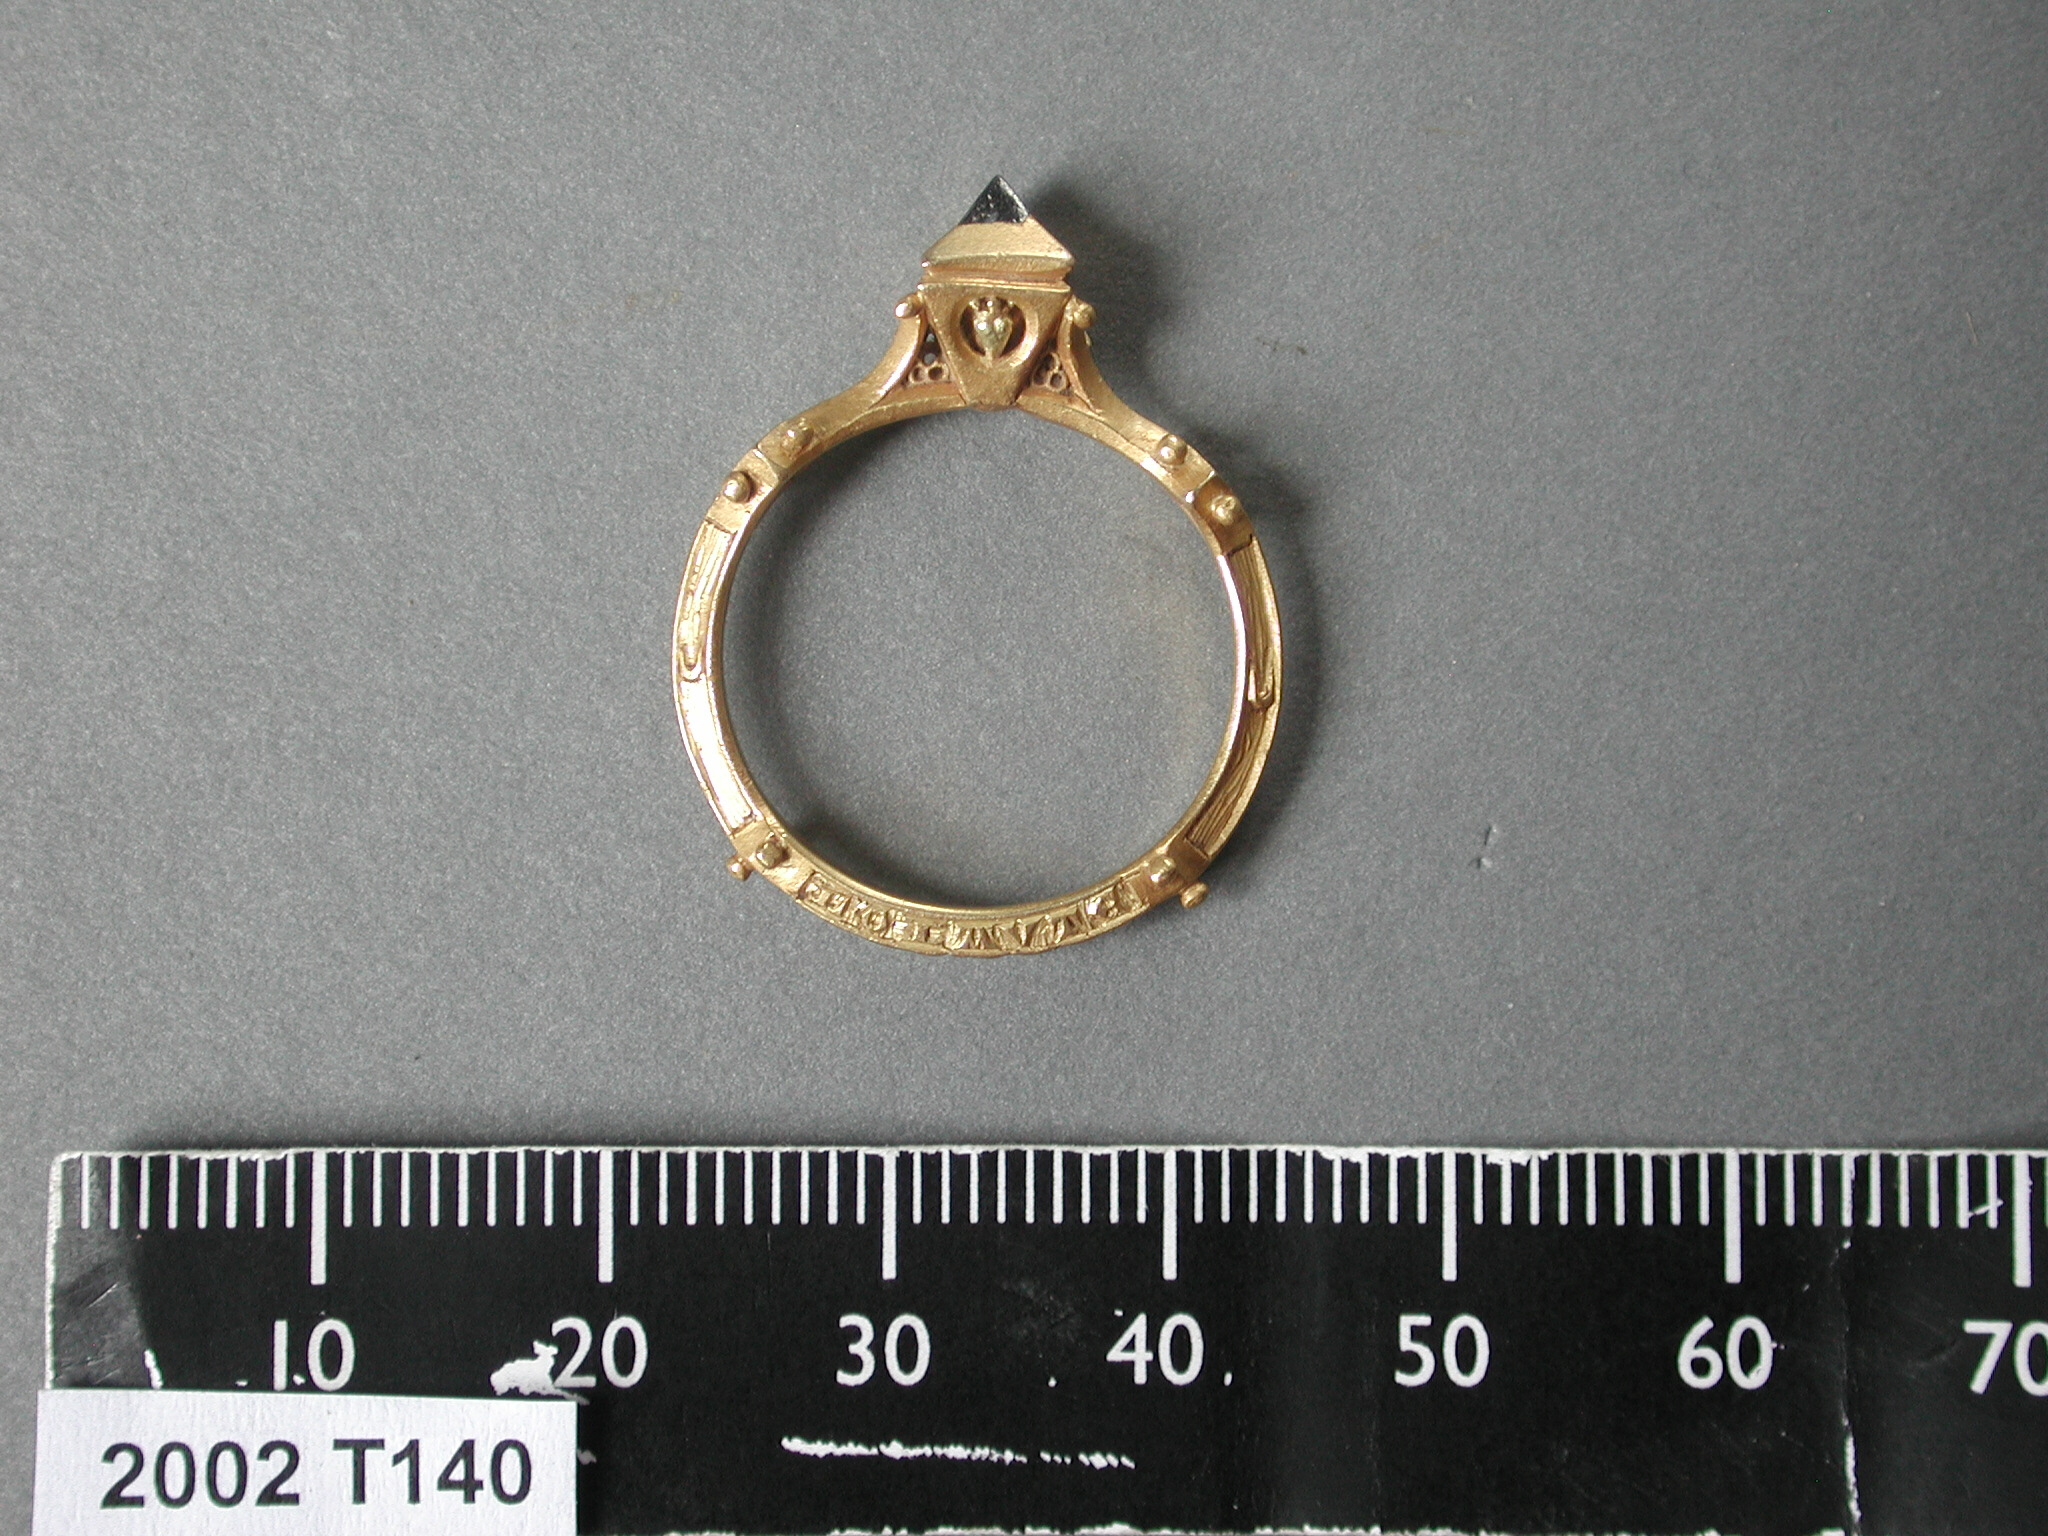 a close up of an engagement ring with a ruler on the side